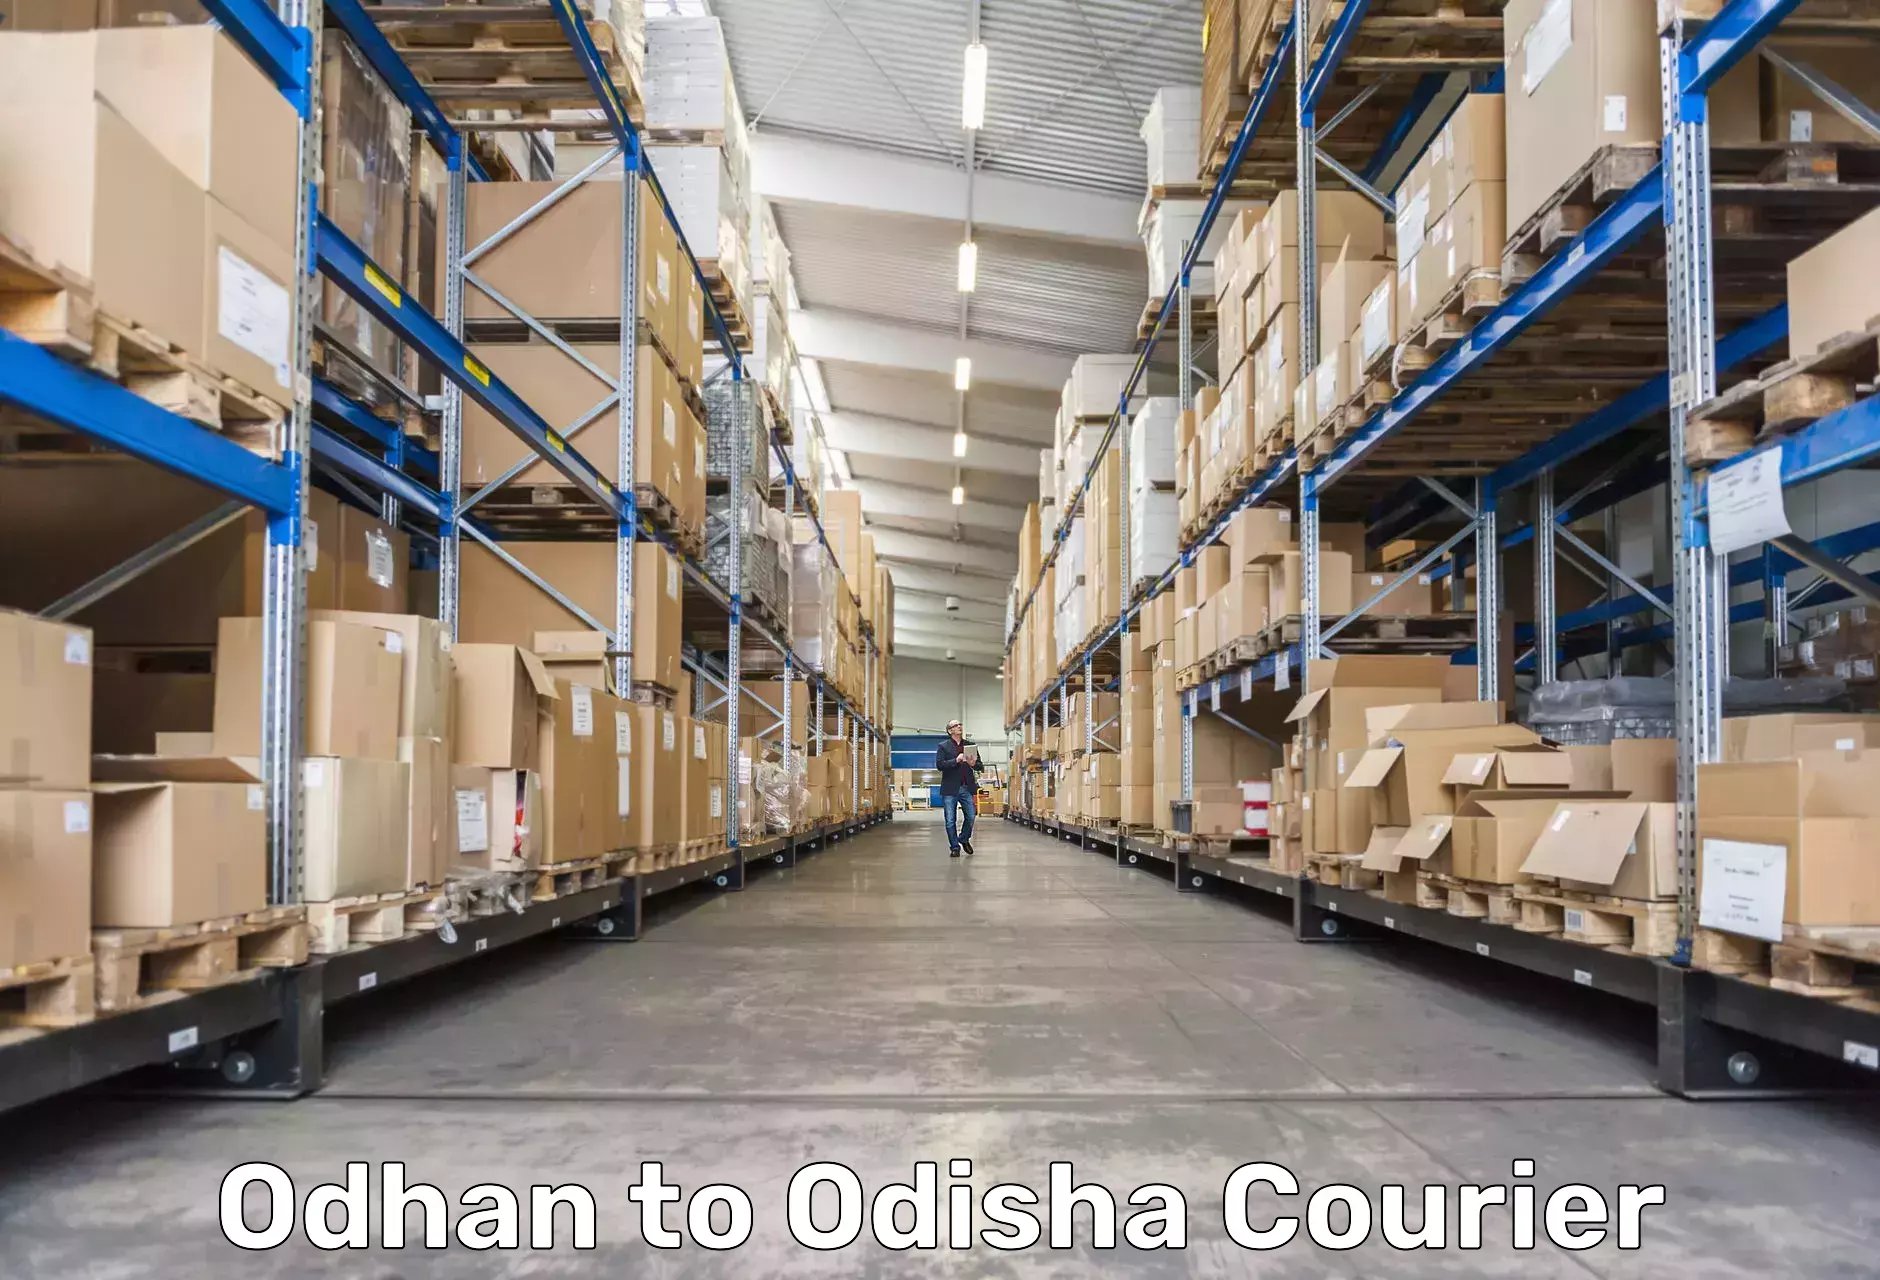 Fast delivery service Odhan to Raikia